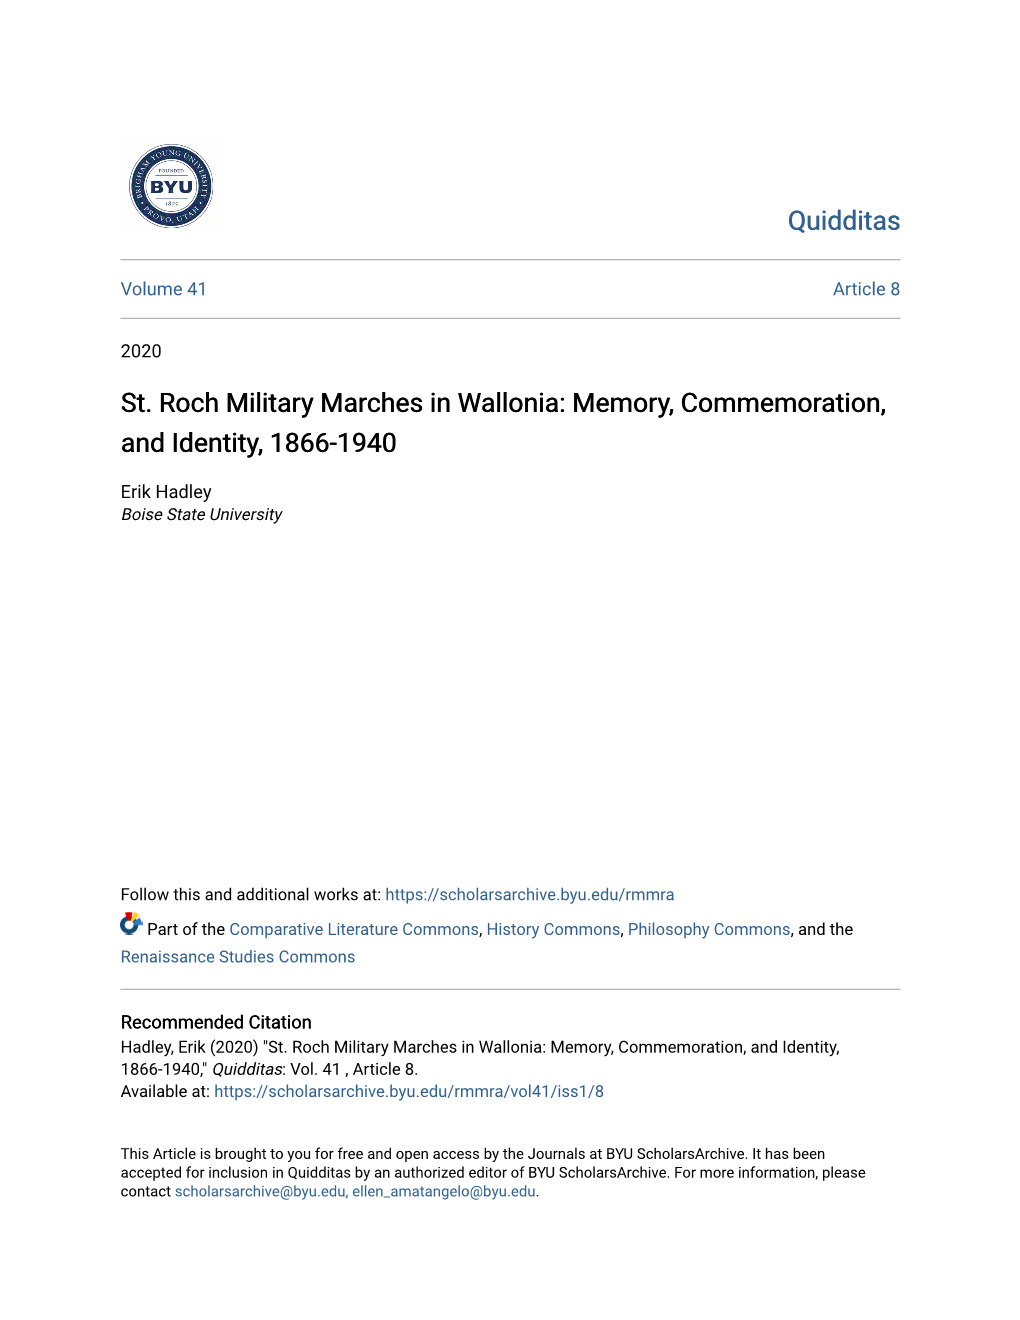 St. Roch Military Marches in Wallonia: Memory, Commemoration, and Identity, 1866-1940